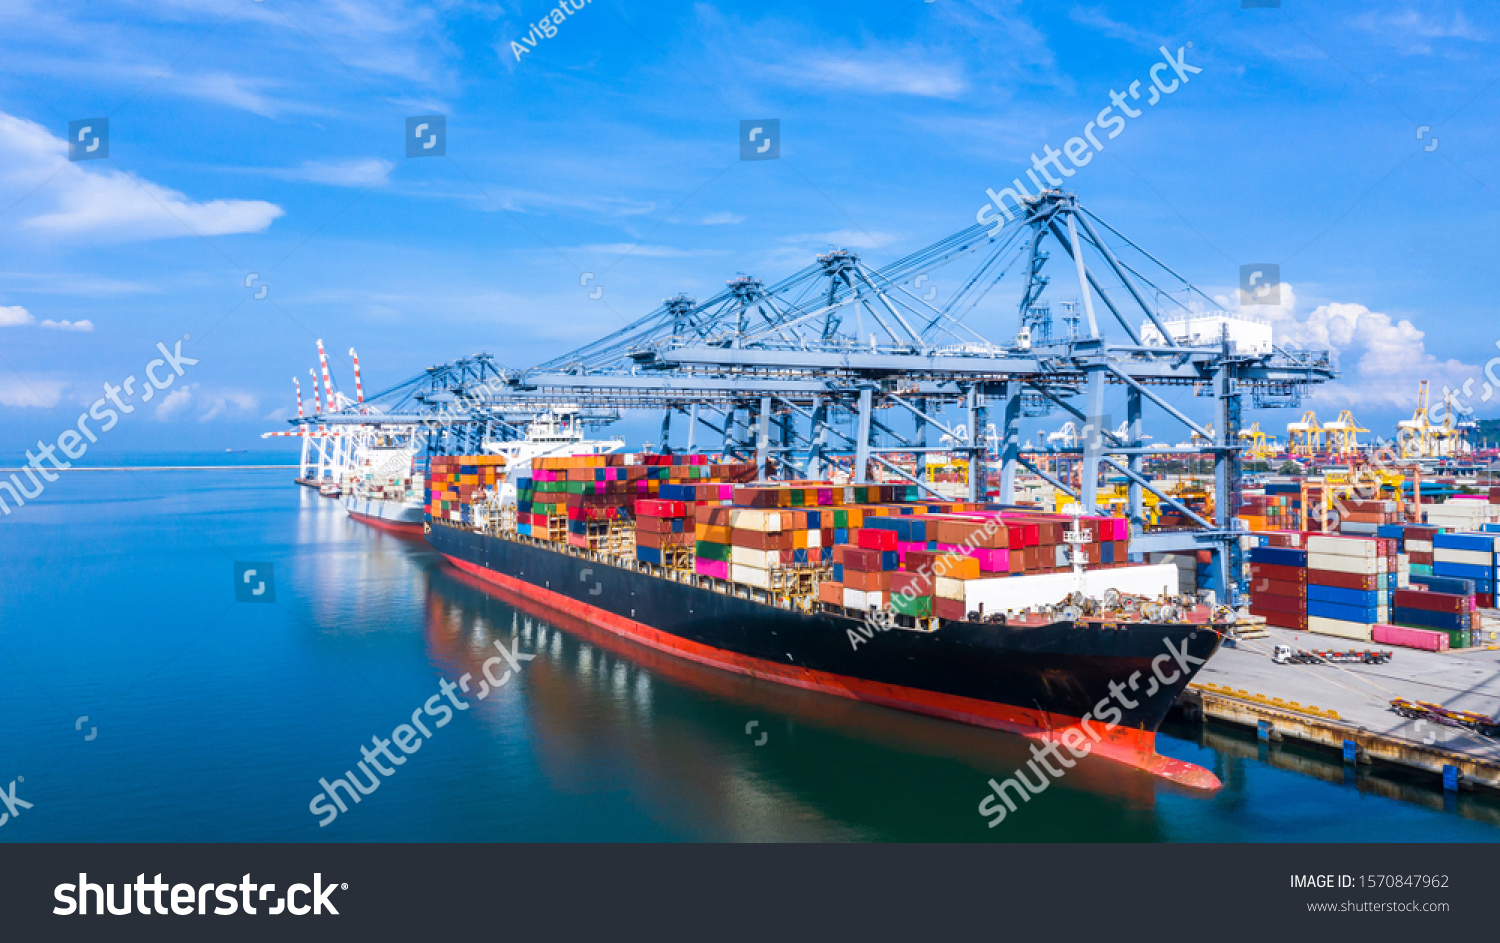 Container ship at industrial port in import export business logistic and transportation of international by container ship in the sea, Container loading in cargo freight ship with industrial crane. #1570847962